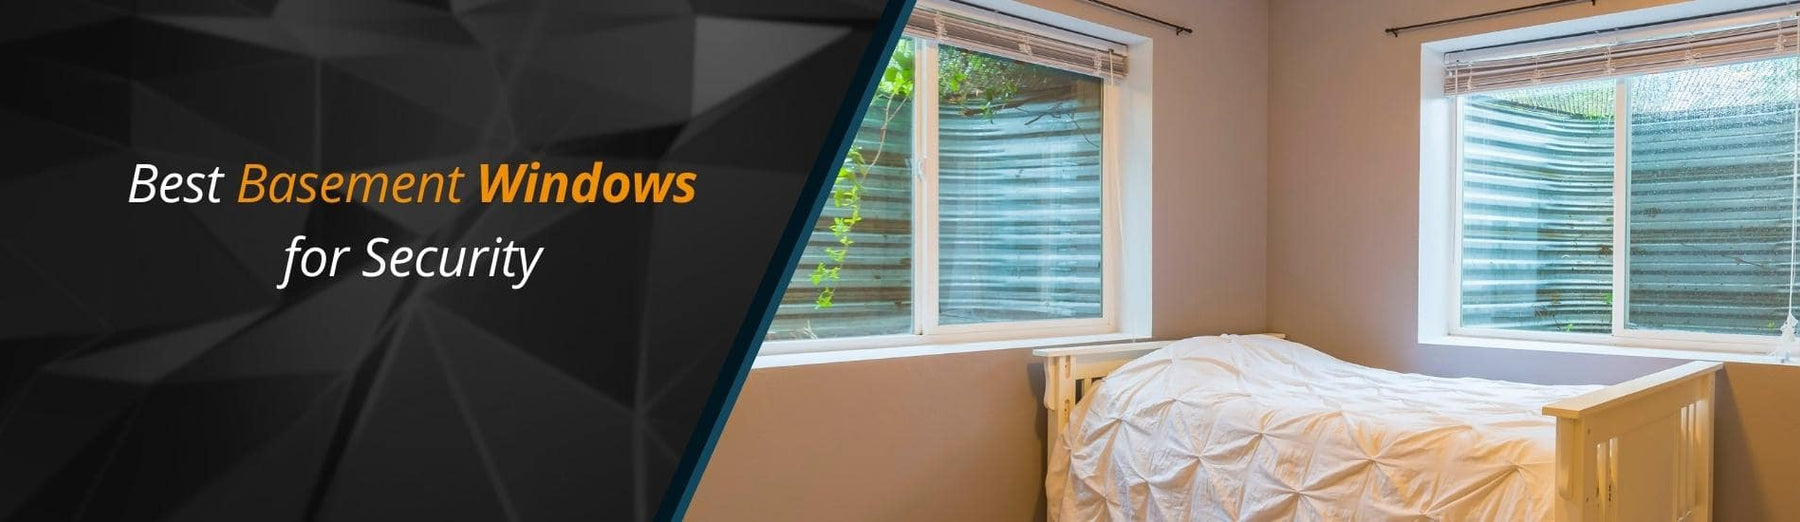 Best Basement Windows for Security: Top Choices and Expert Tips